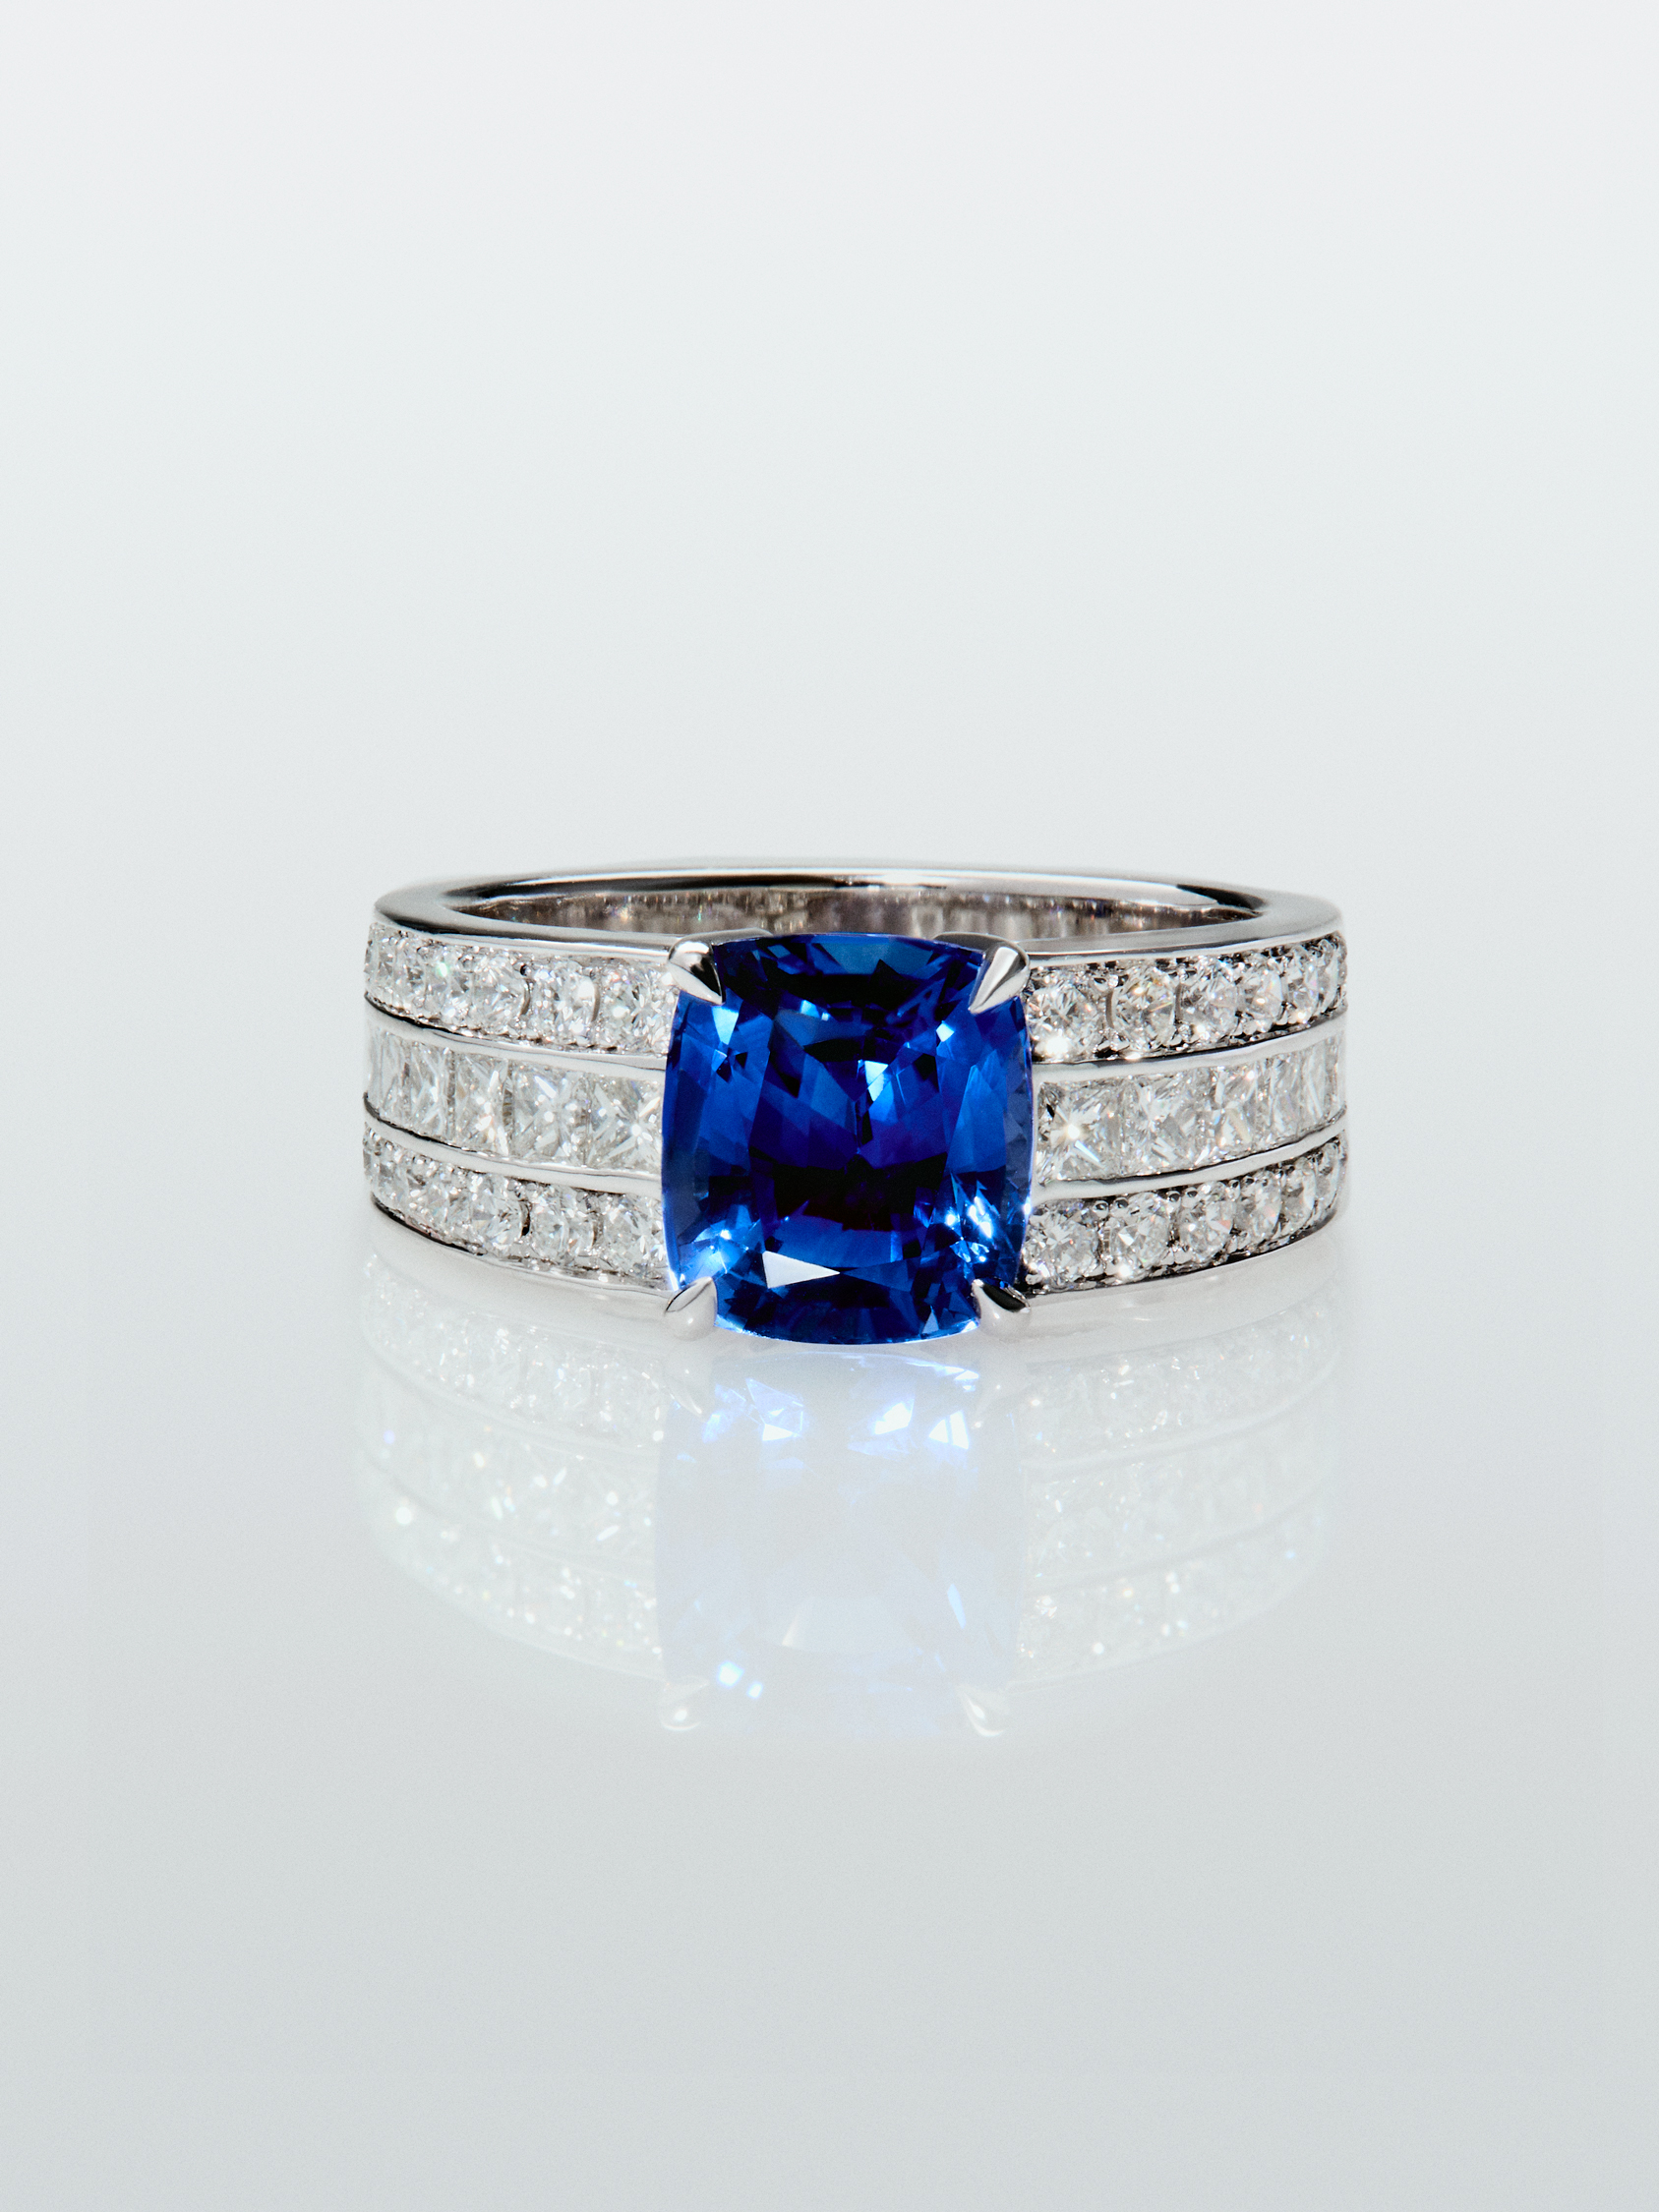 18K white gold ring with cushion-cut royal blue sapphire of 3.217 cts, 50 brilliant-cut diamonds with a total of 1.05 cts and 8 princess-cut diamonds with a total of 0.48 cts